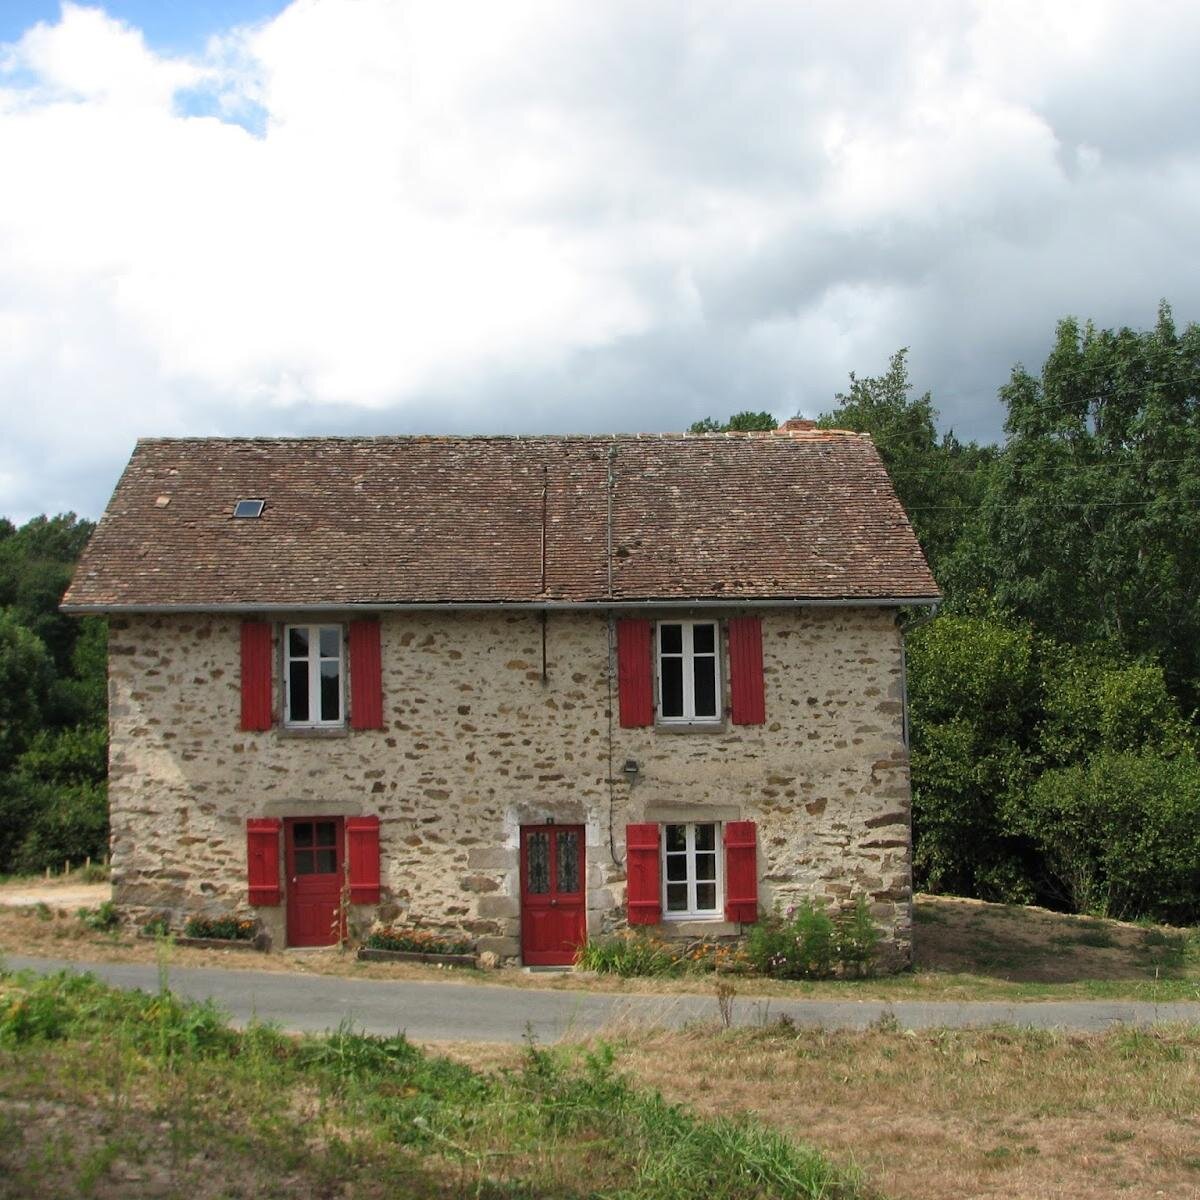 Gite au cœur du Parc Naturel Périgord-Limousin🌳
Self-catering holiday rental in the middle of a beautiful region. Pictures show what to see around.